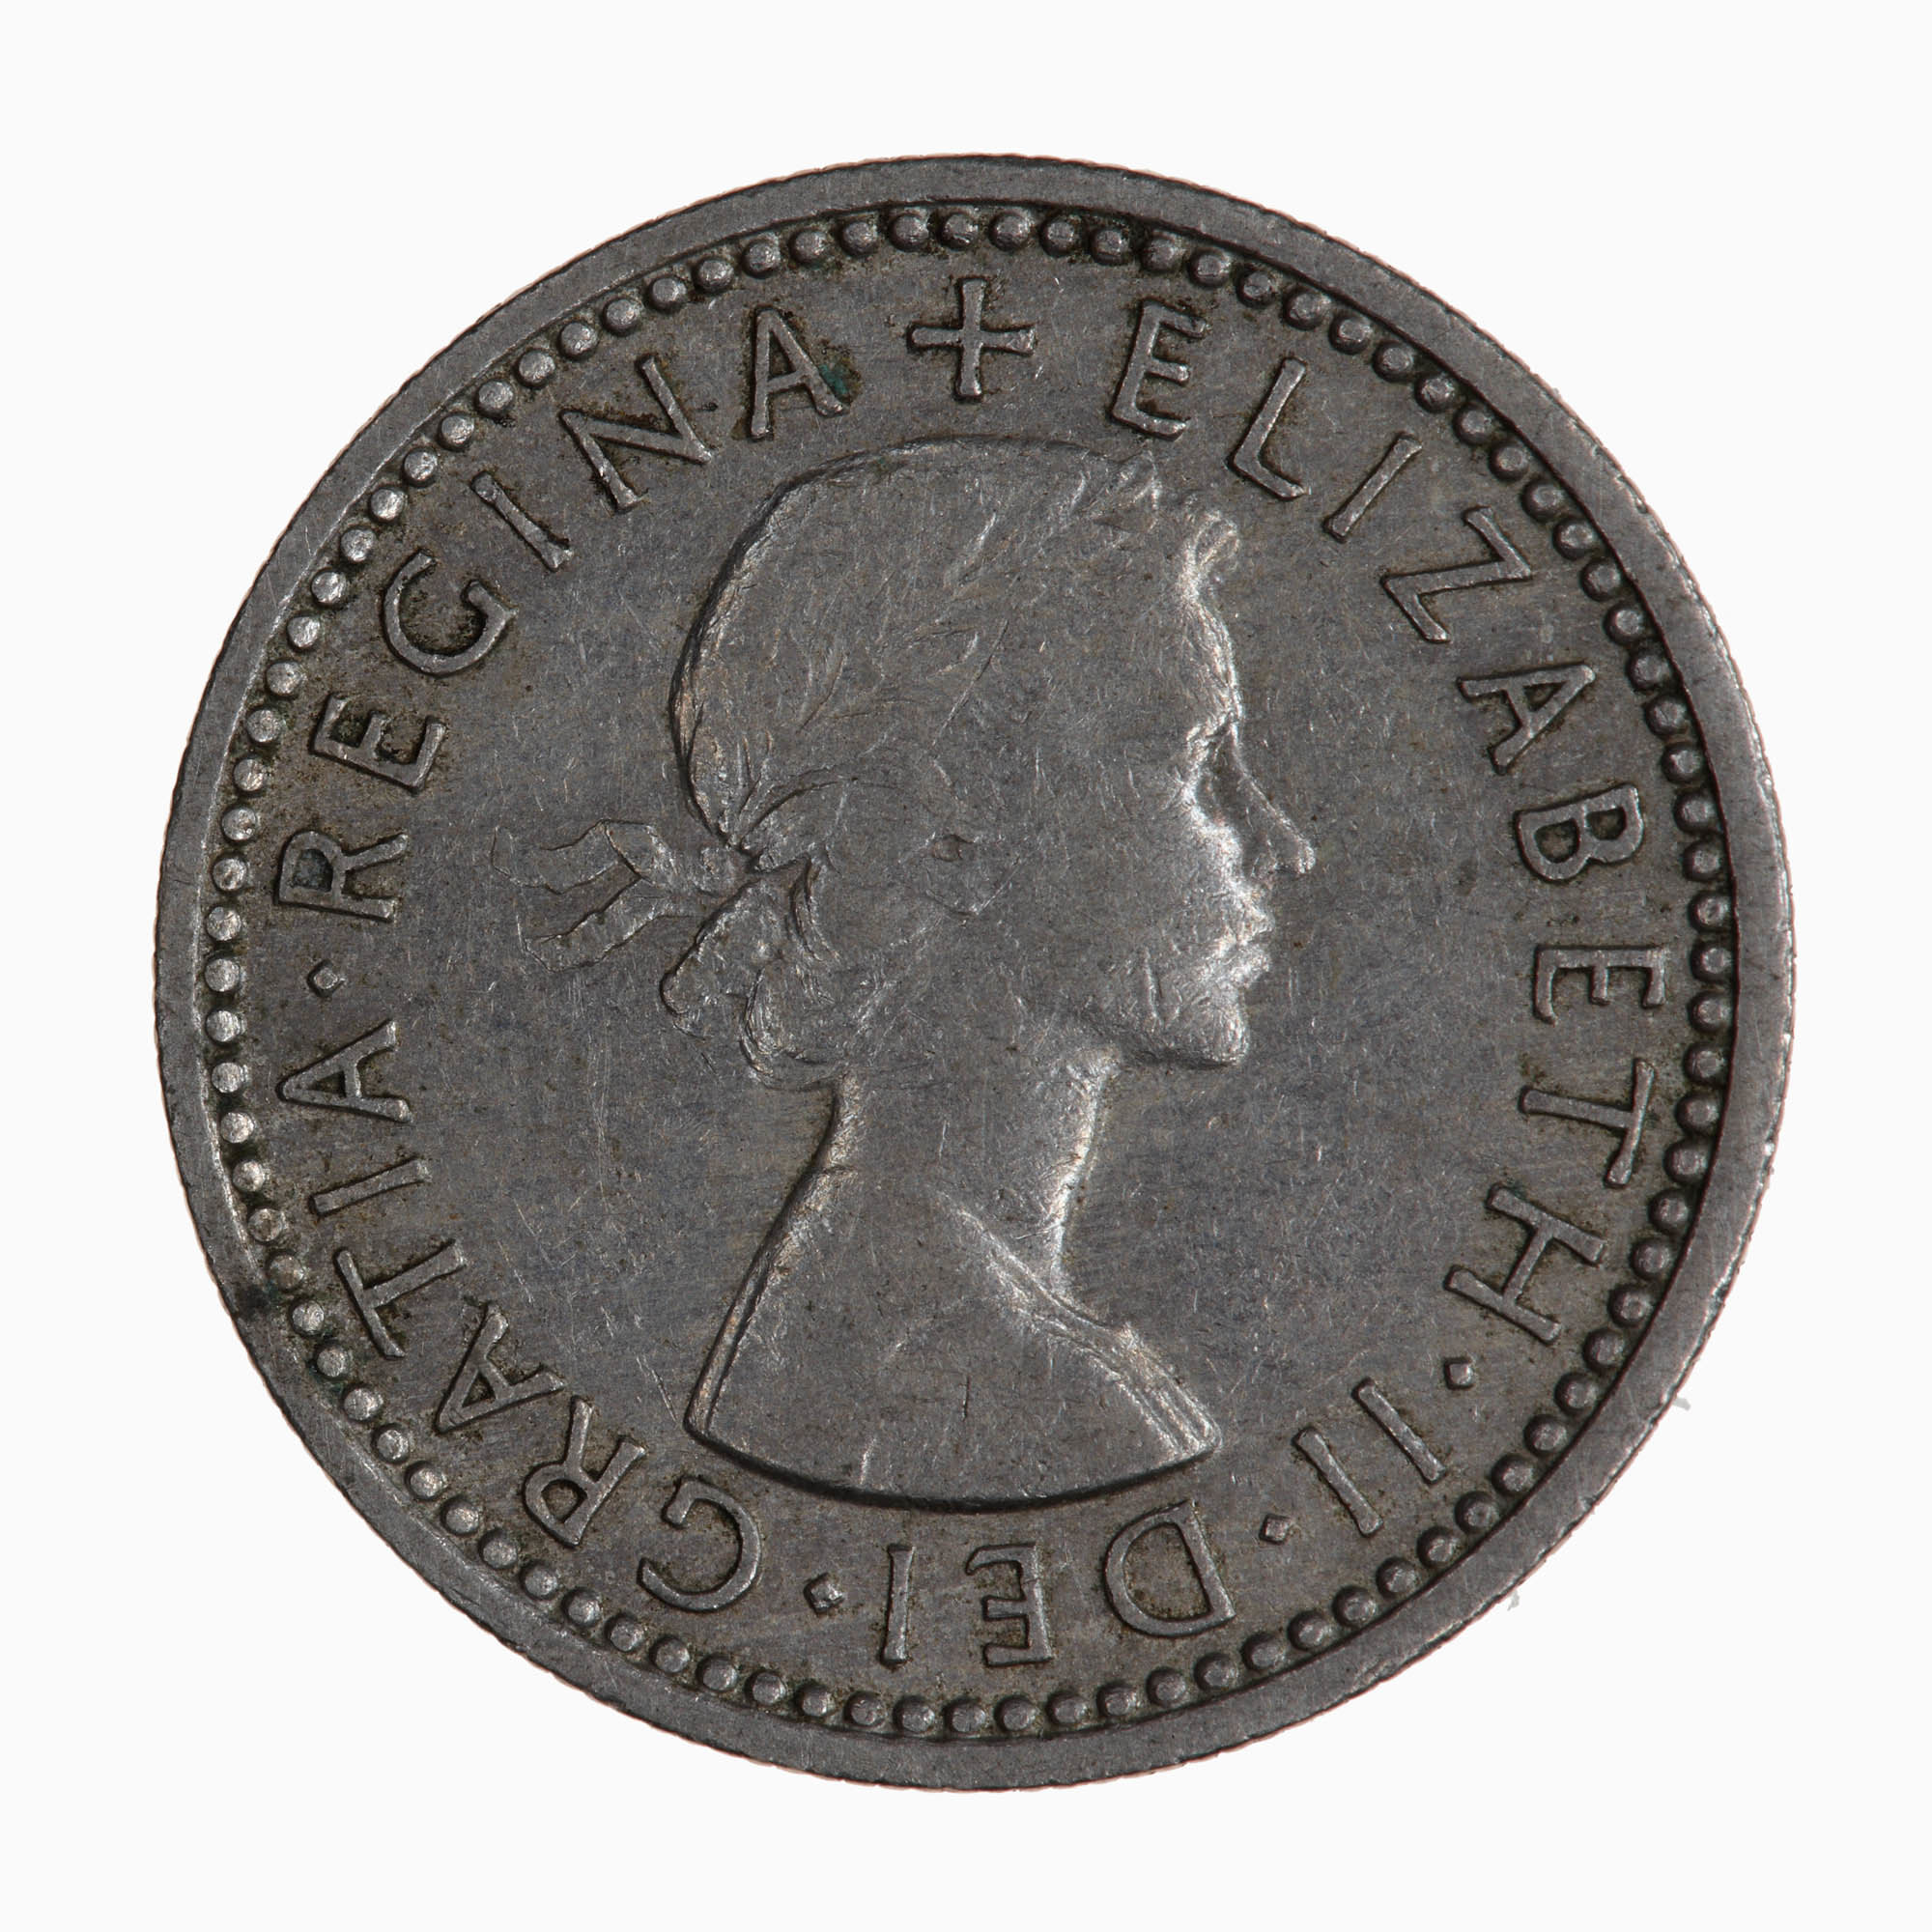 Coin - Sixpence, Elizabeth II, Great Britain, 1958